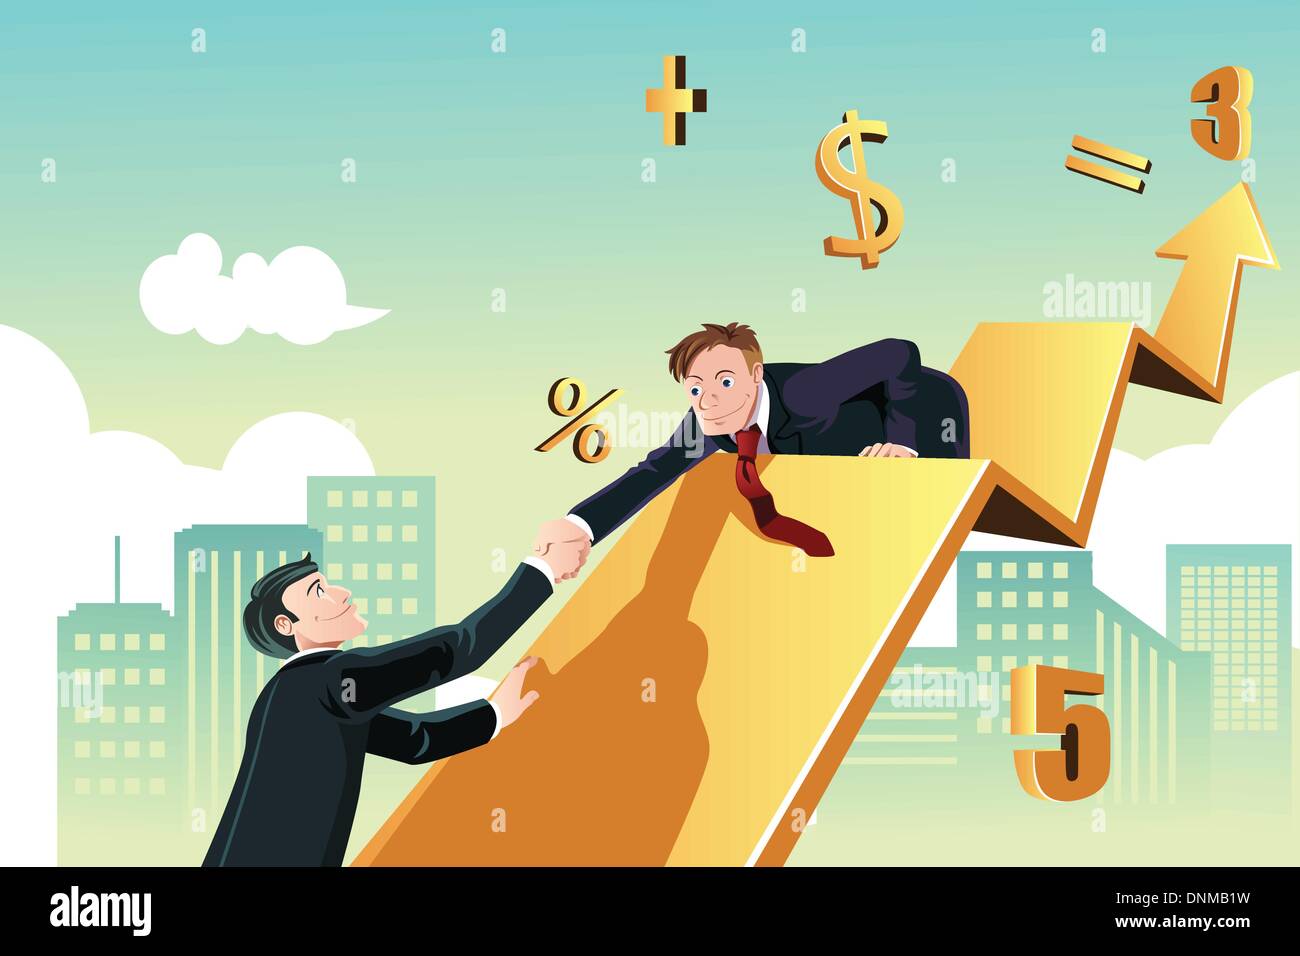 A vector illustration of a business concept of a businessman helping his colleague to achieve success together Stock Vector